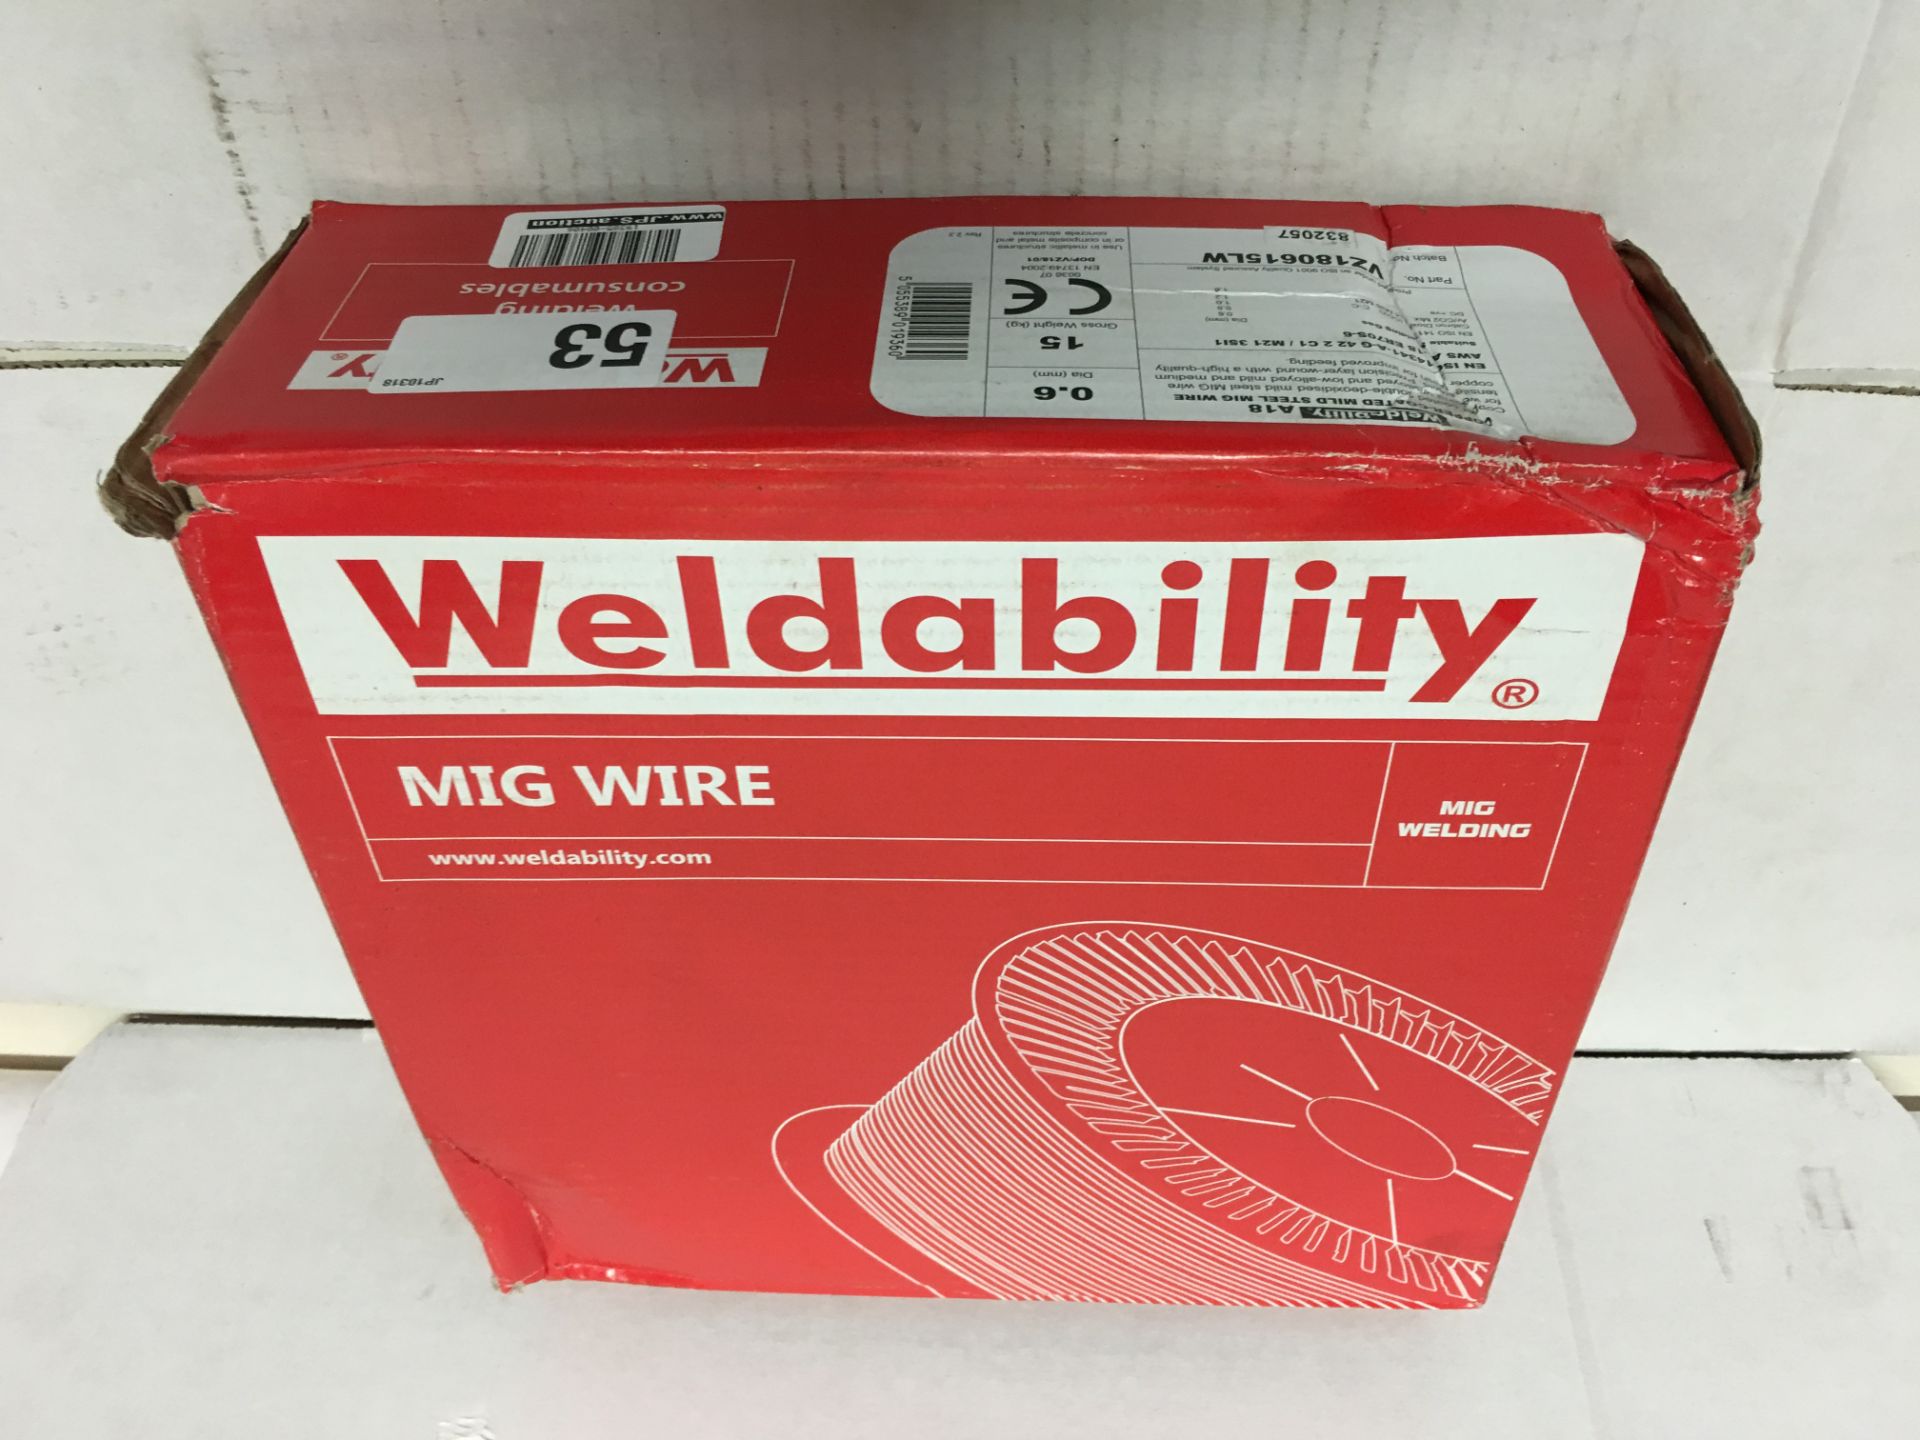 1 x Weldability Sif VZ180615LW A18/G3Si1 MIG Wire 0.6mm 15kg | EAN: 5055389019360 | RRP £51.9